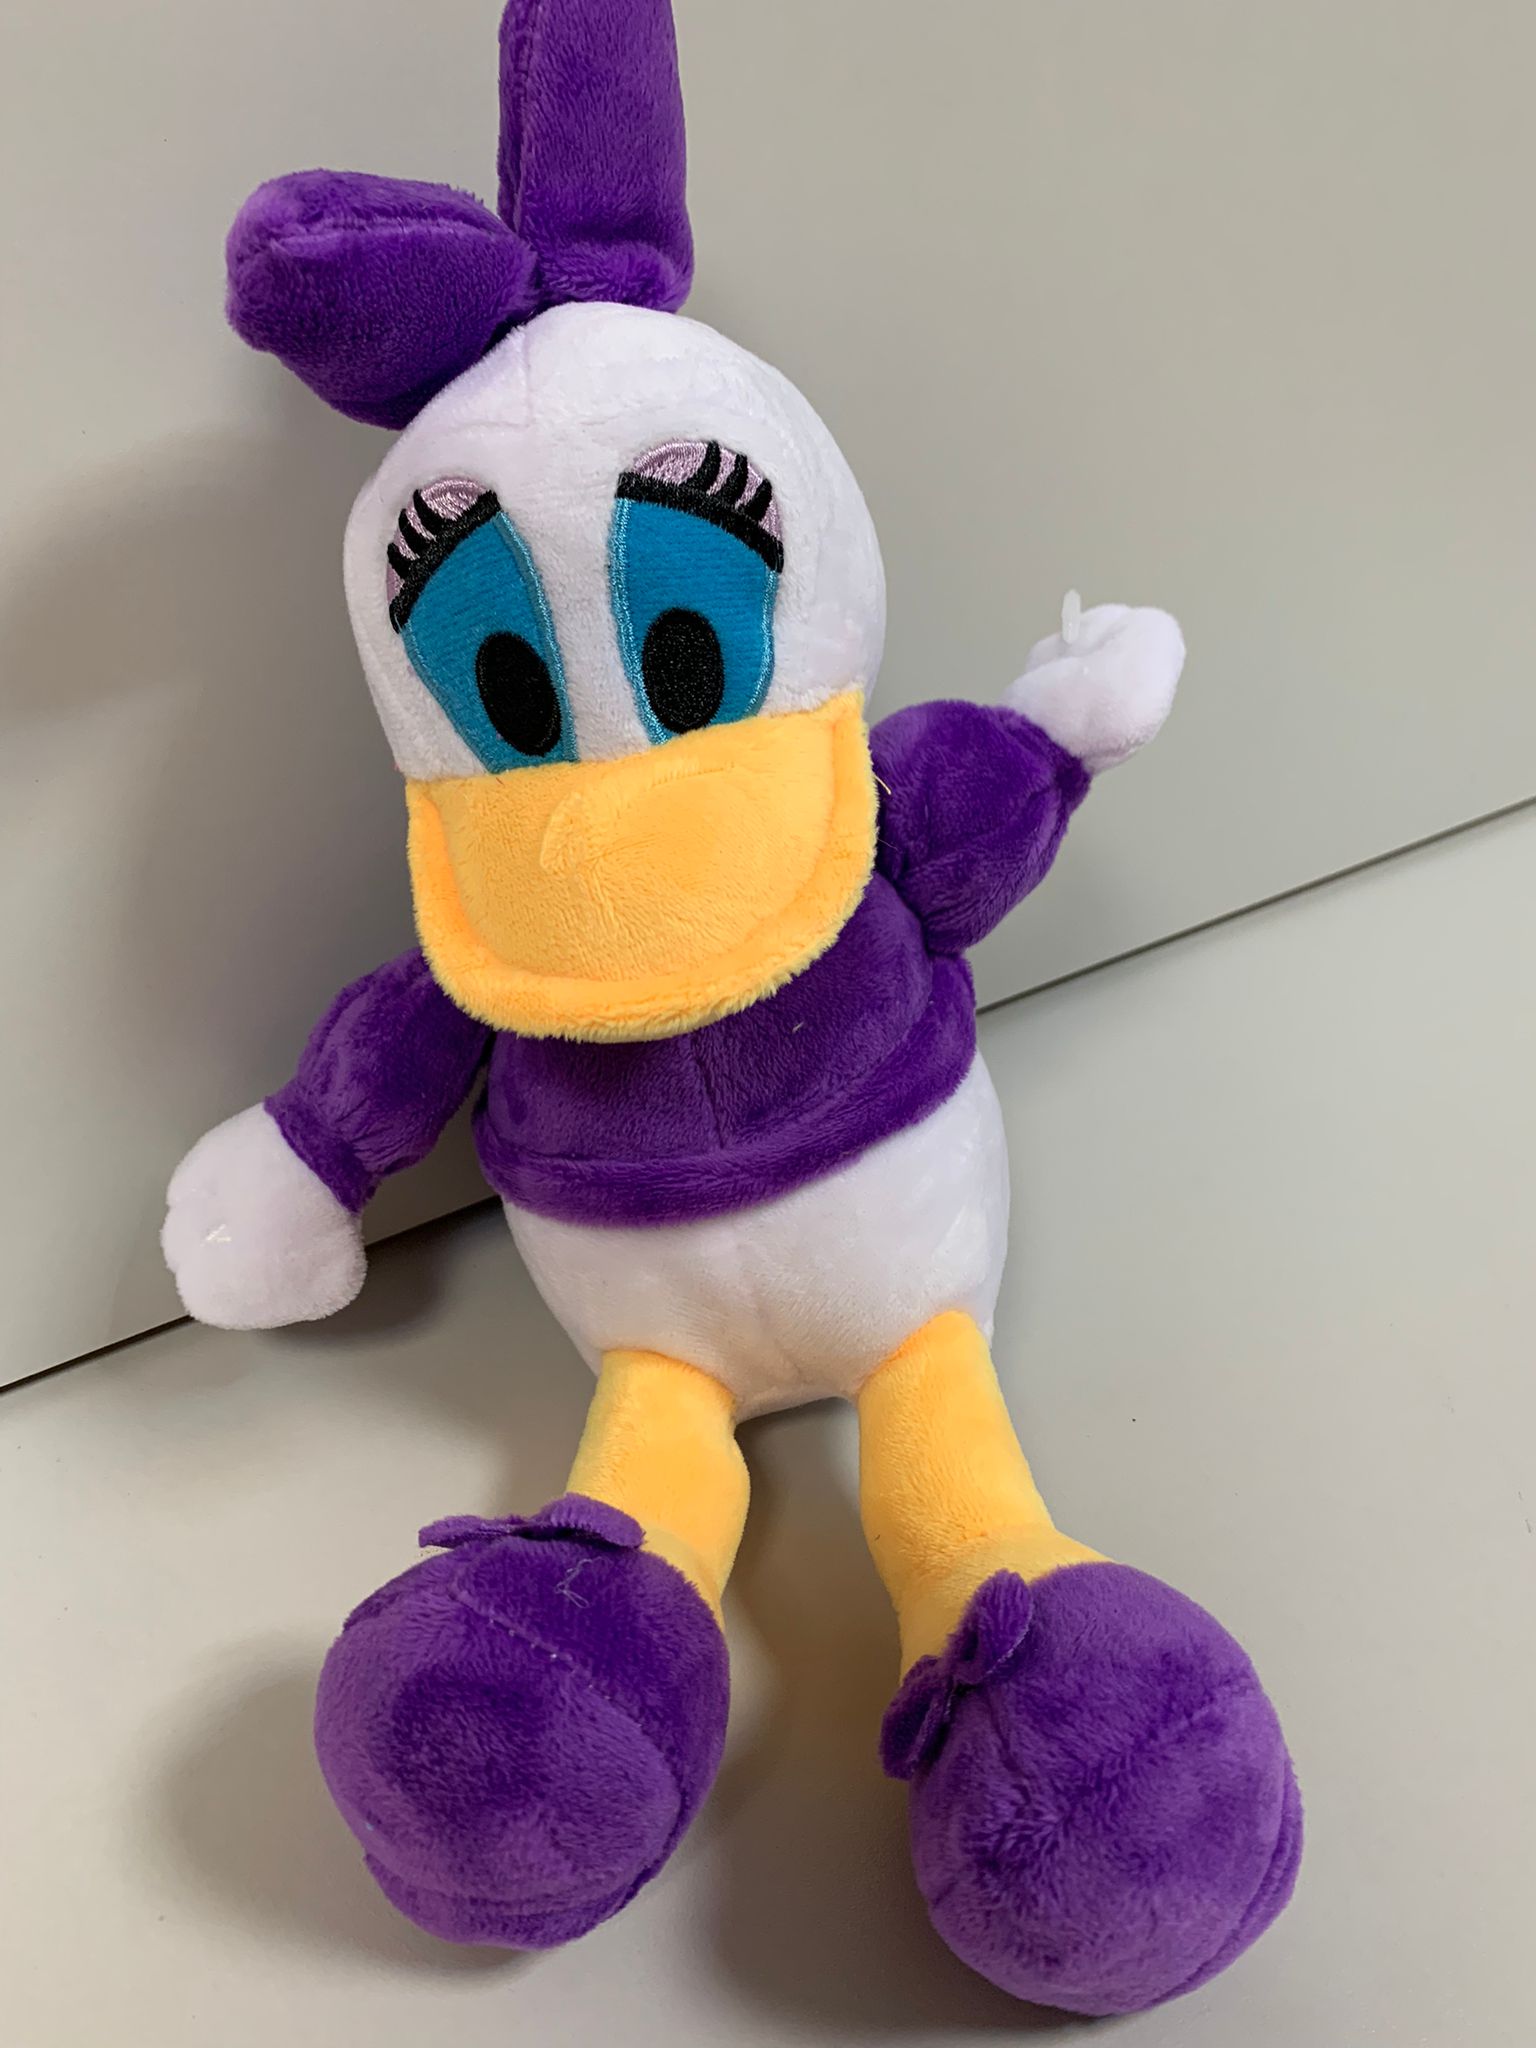 Plush character Daisy from Donald the duck, purple